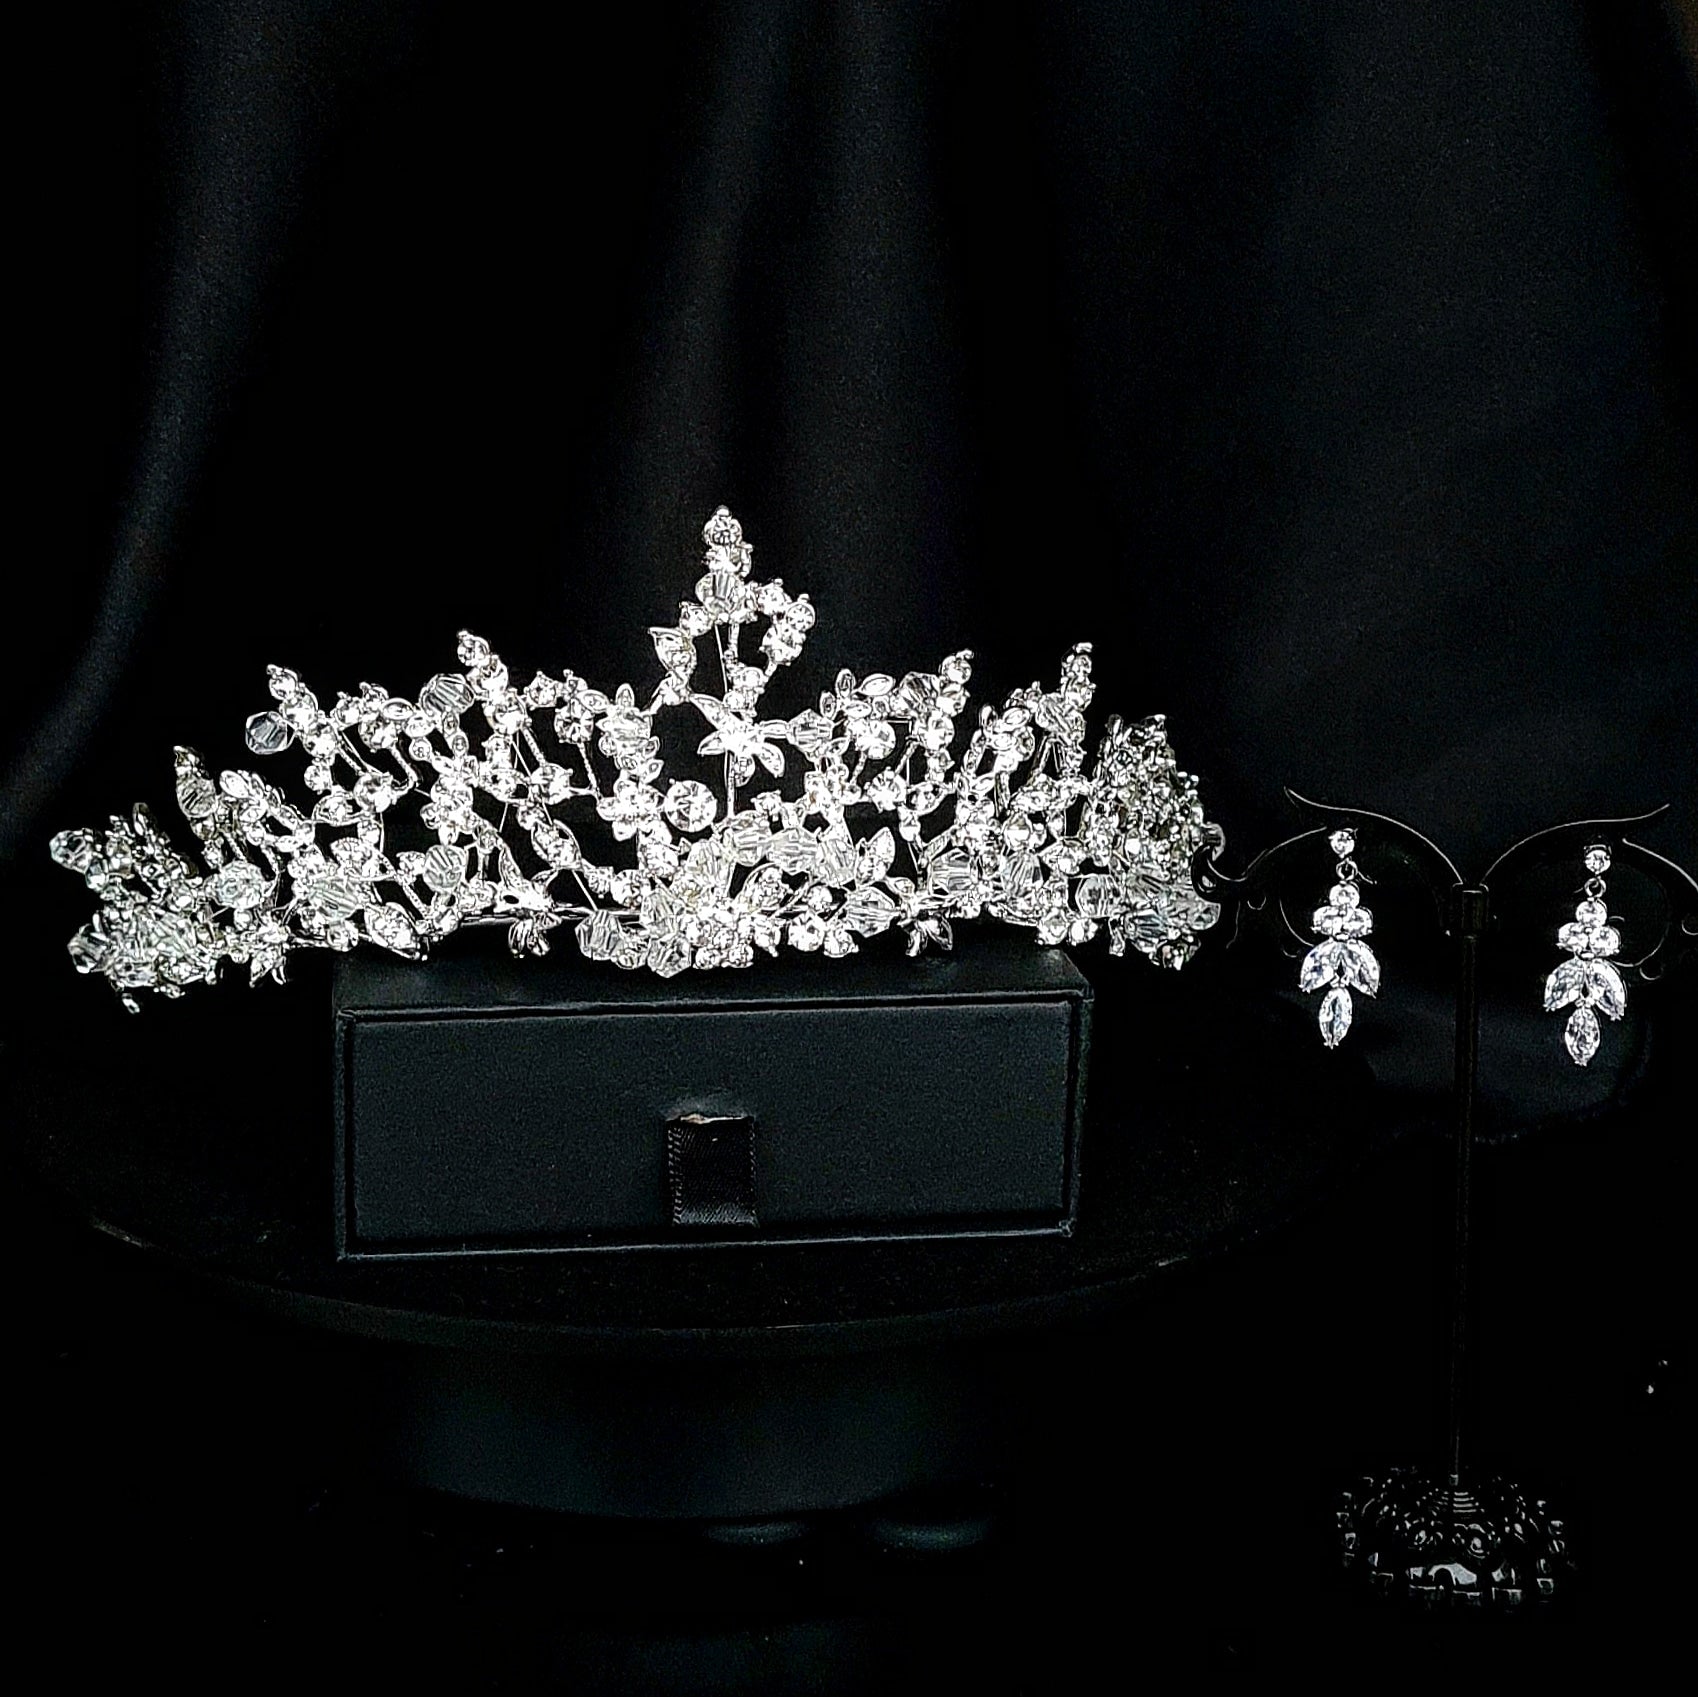 A silver tiara with rhinestones sitting on top of a black box. The tiara is made up of multiple curved bands, each of which is decorated with rhinestones. The tiara is sitting on top of a black box, which is partially obscuring the bottom of the tiara. next to an earrings